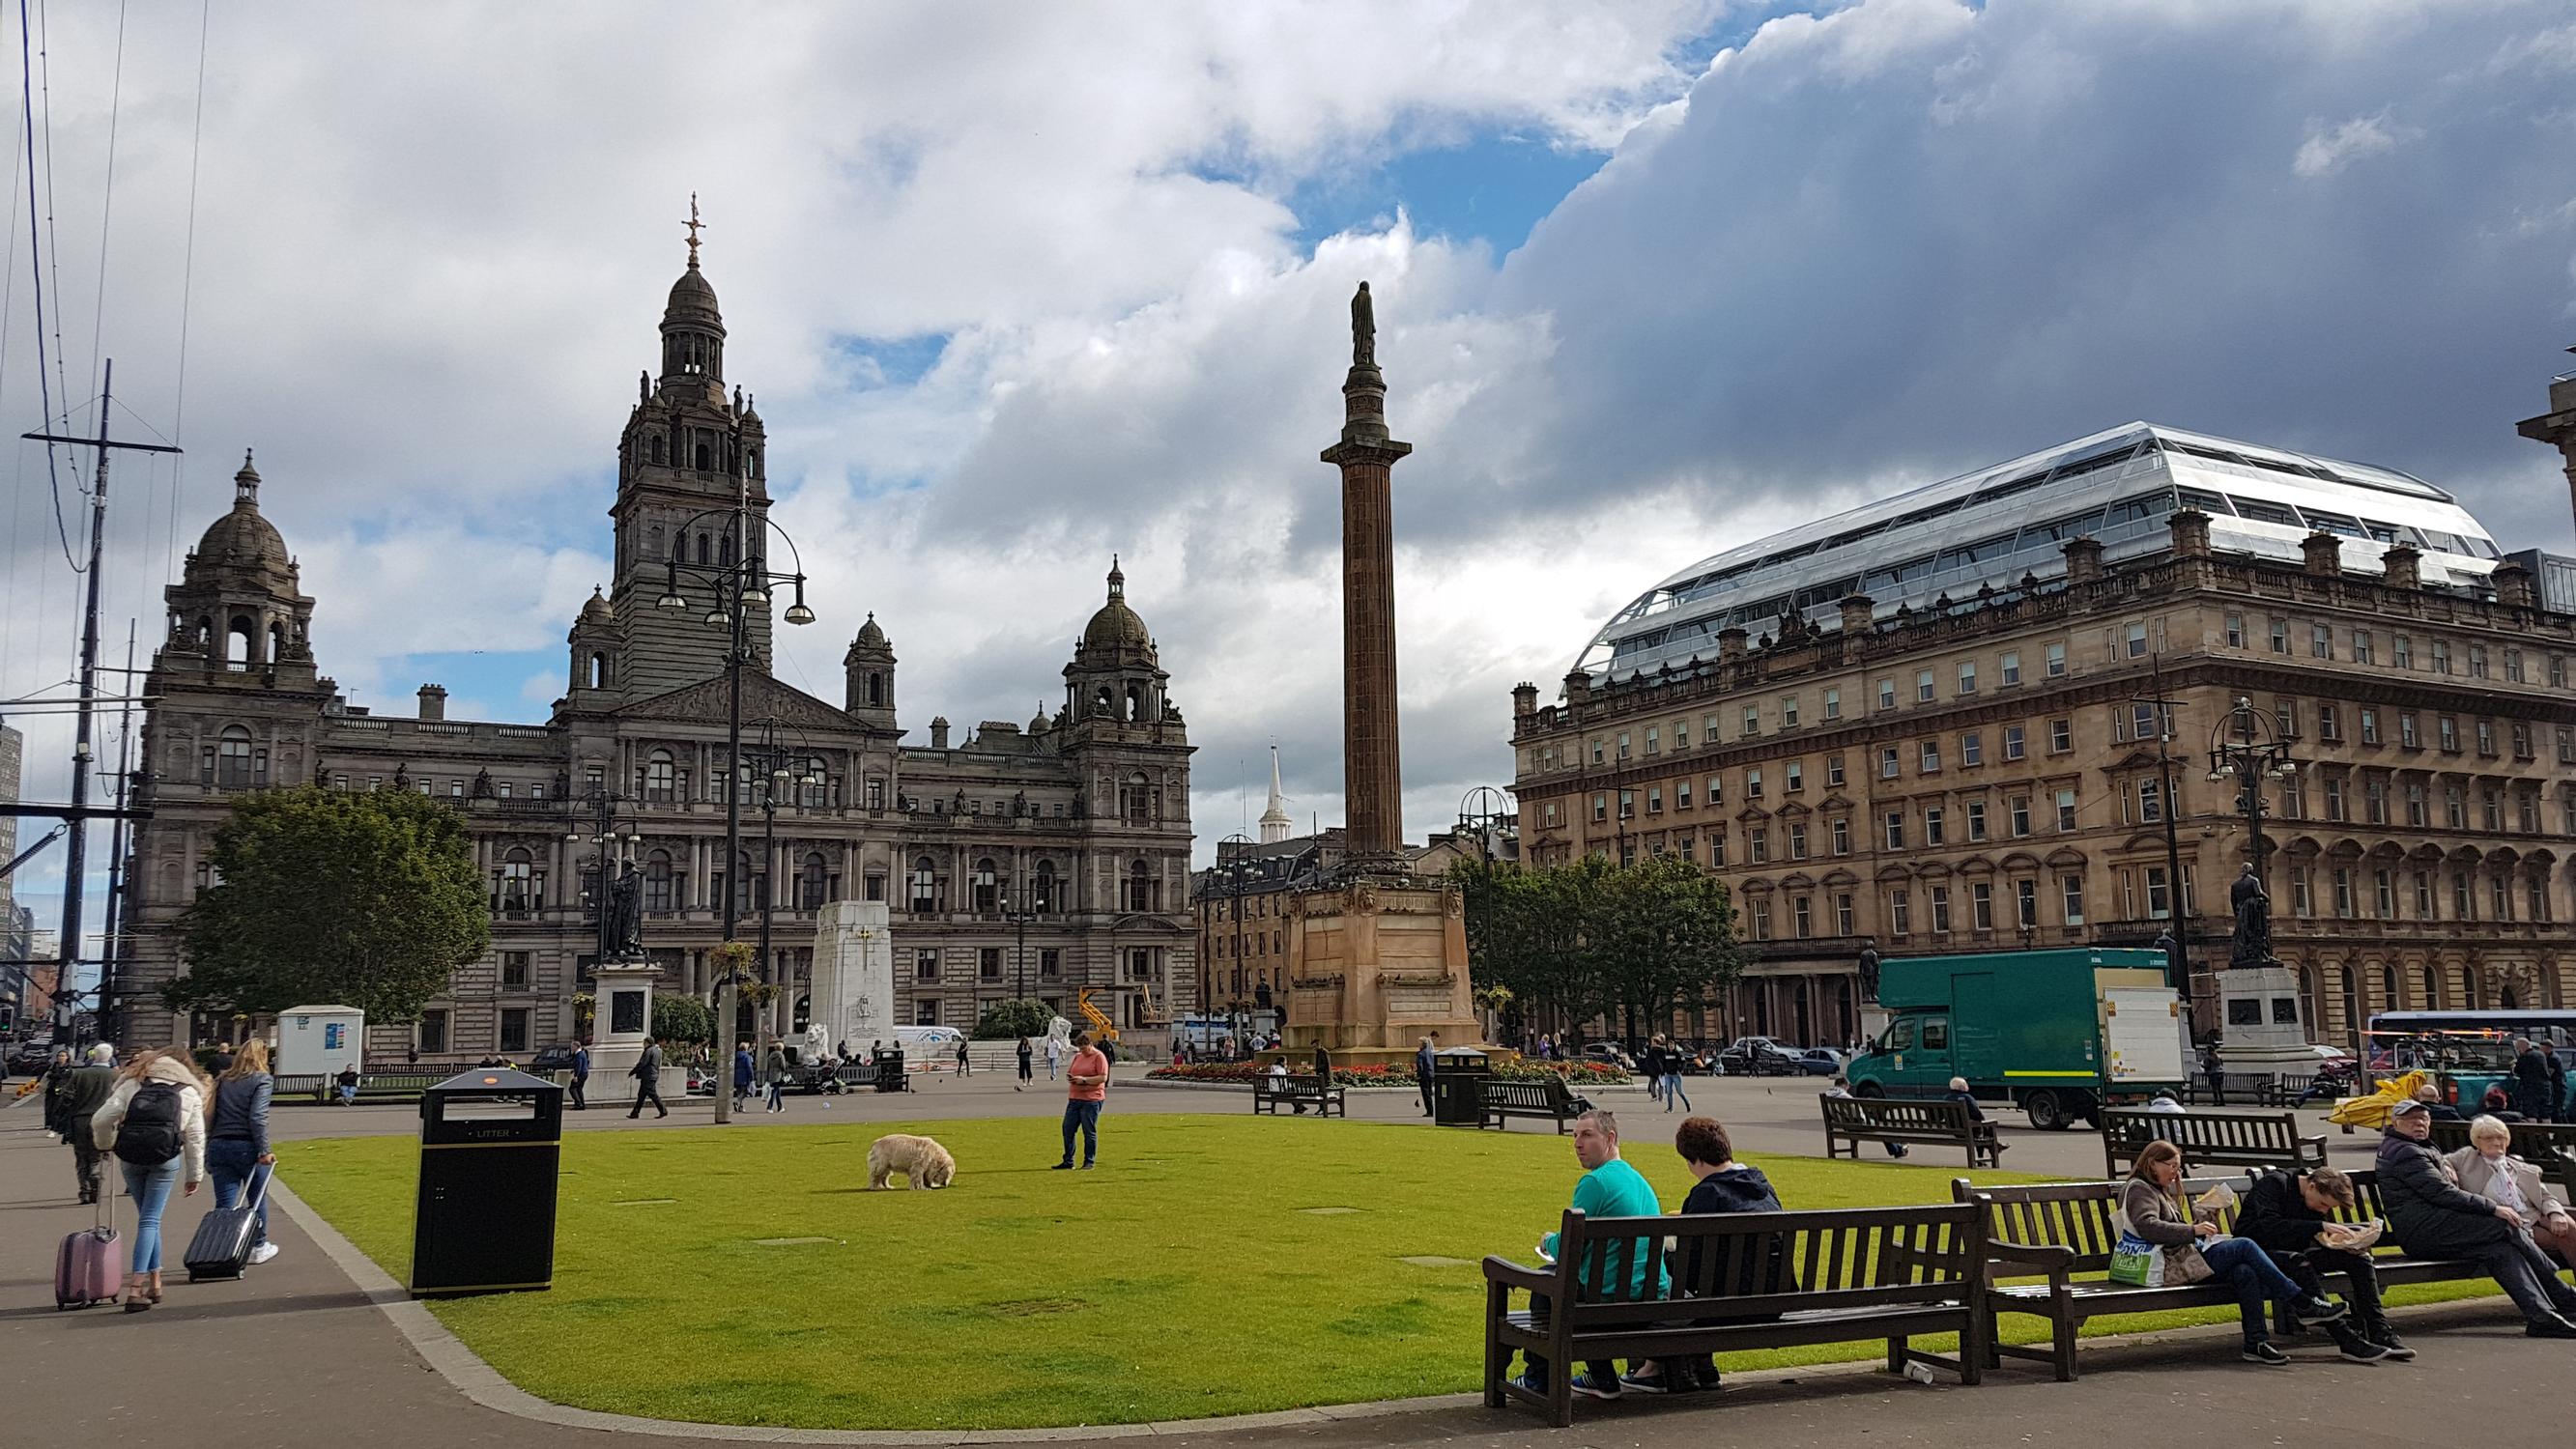 Green space is important for urban health and wellbeing. Photo: Glasgow by Stinglehammer